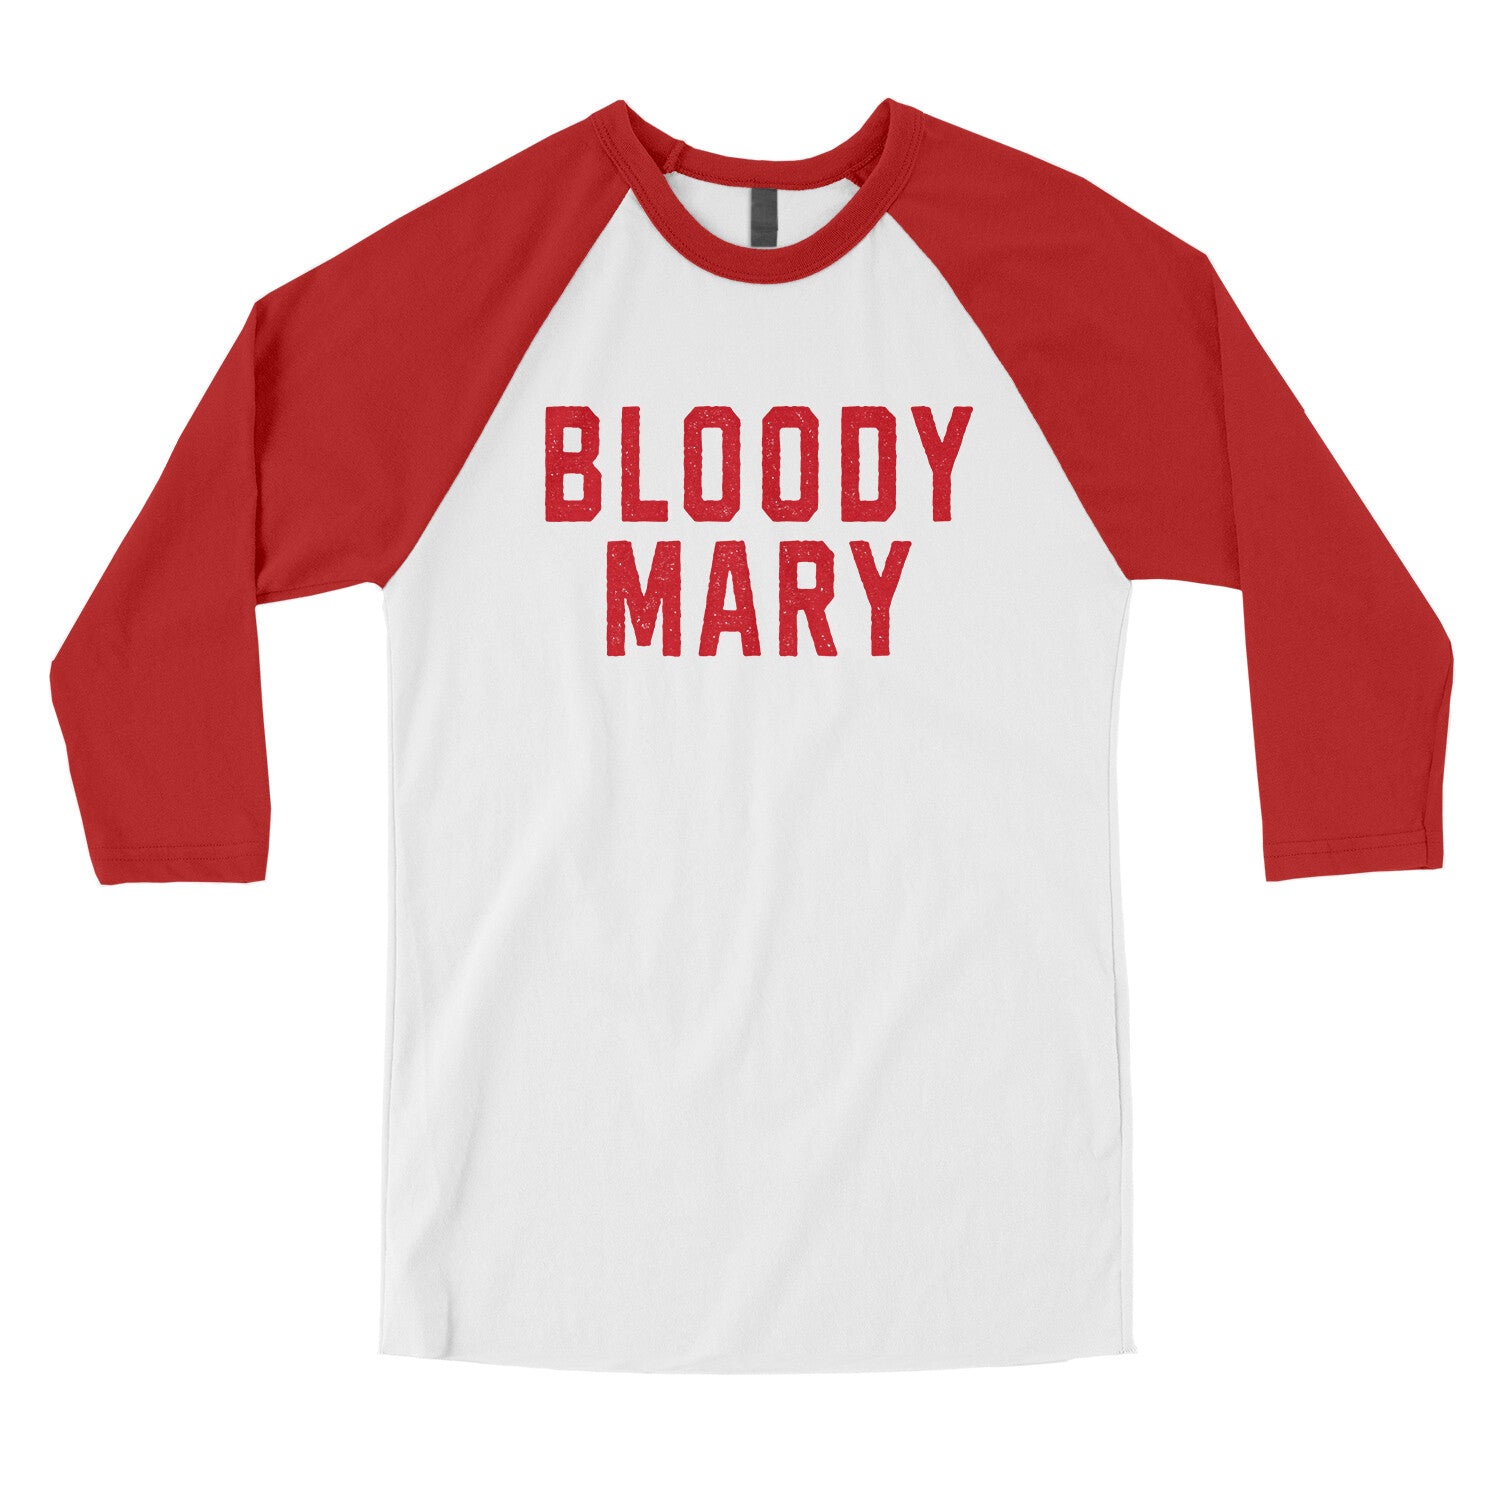 Bloody Mary in White with Red Color